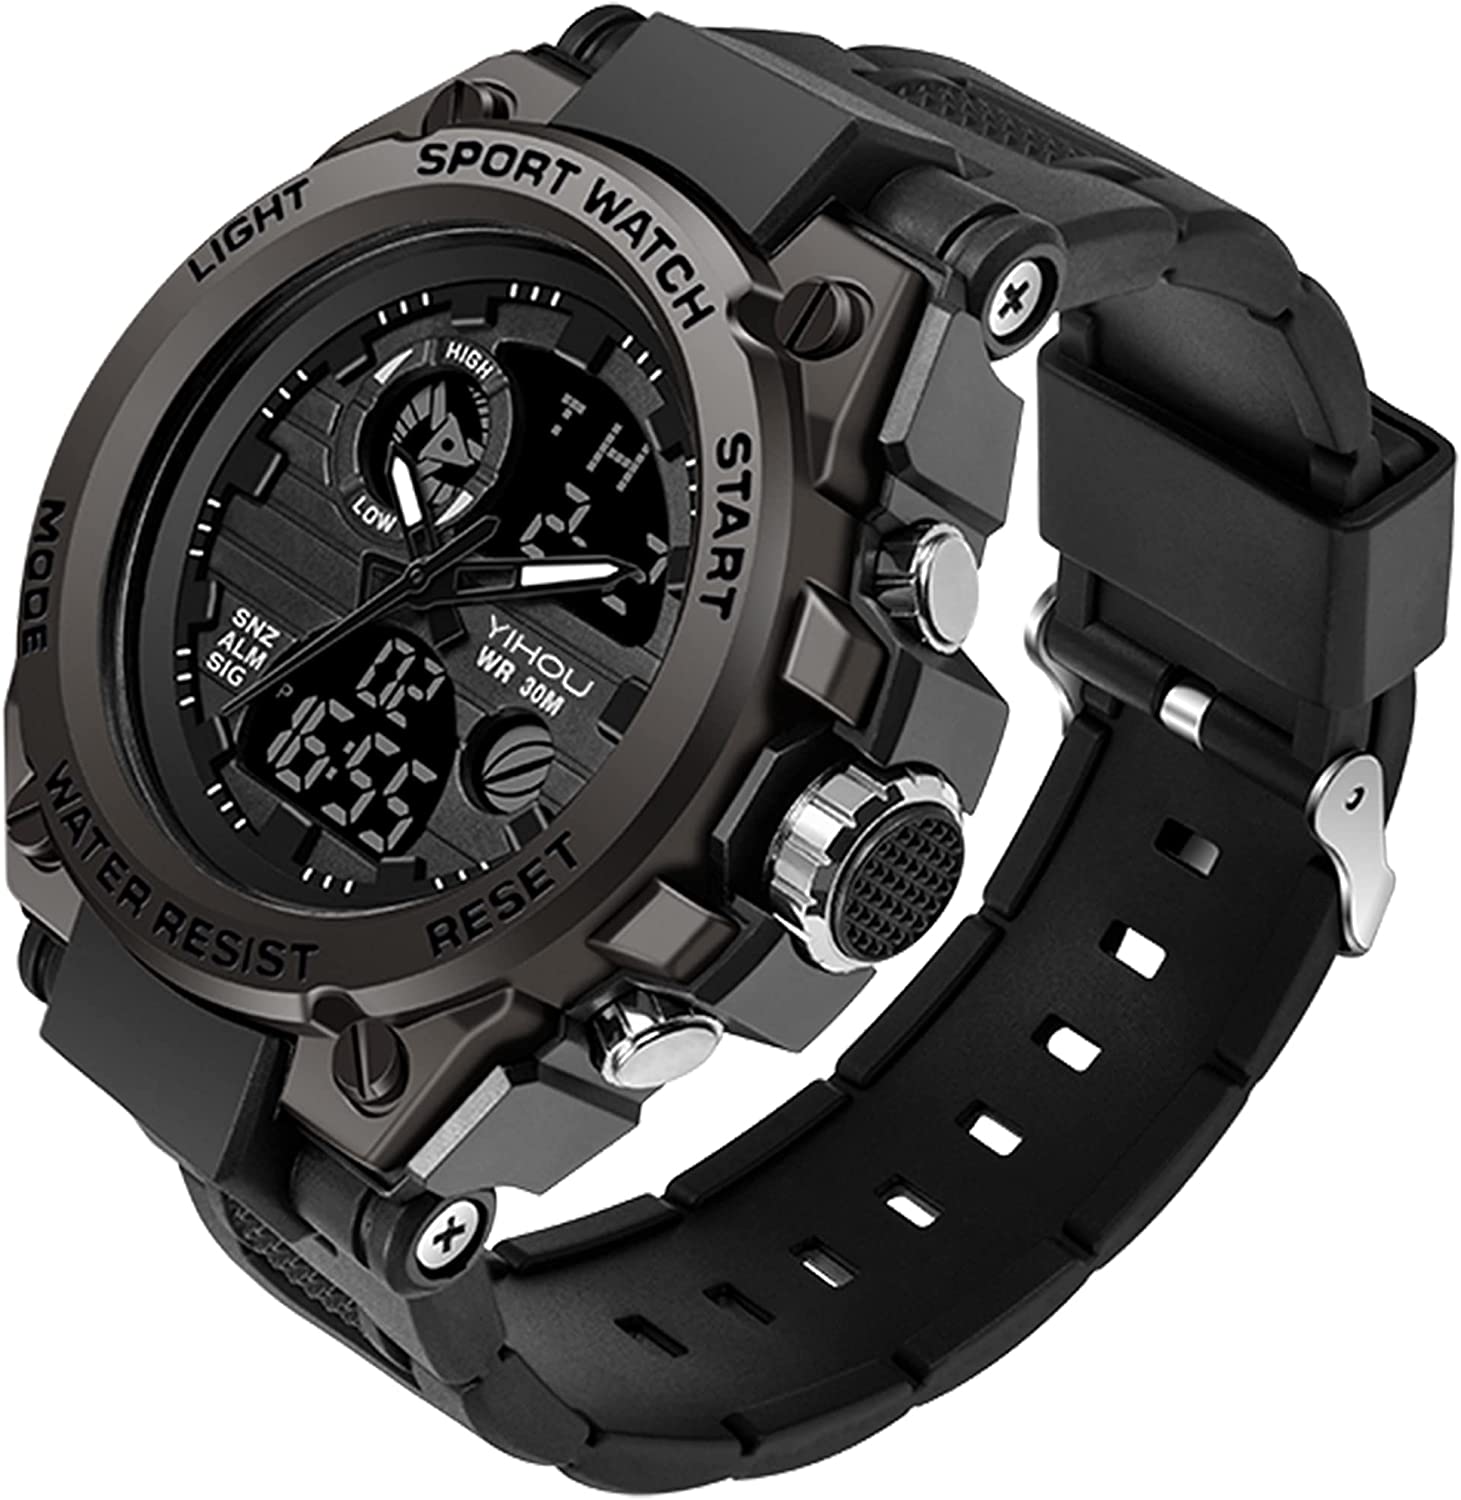 Multi-Functional Military-Grade Outdoor Sports Watch